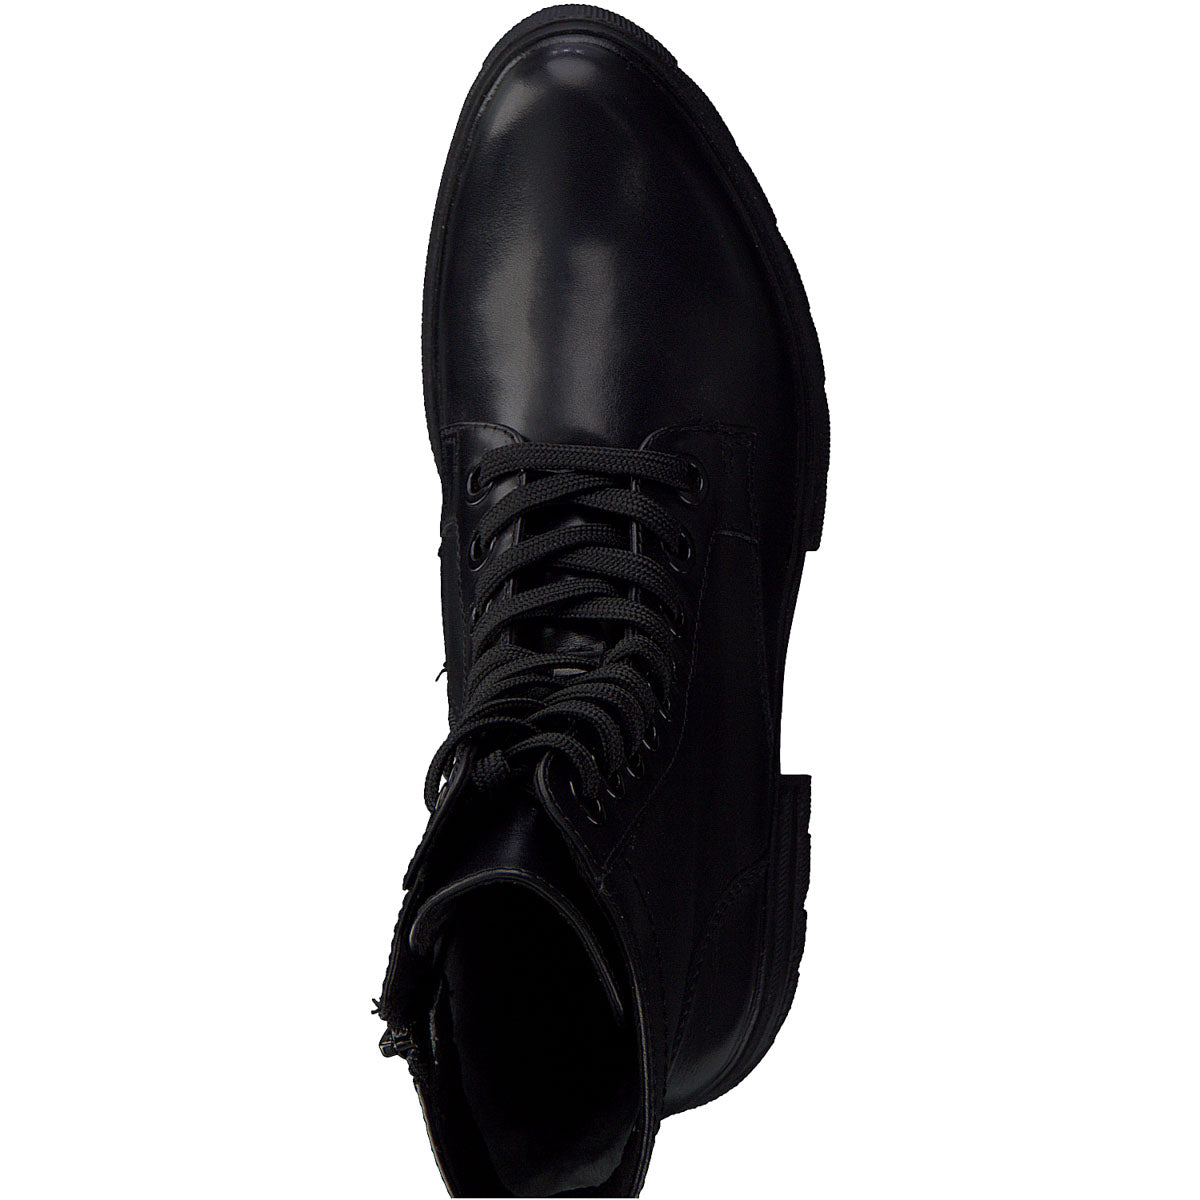 Black Lace-Up Combat Boots: Caprice - Stylish with Innovative Grip Technology